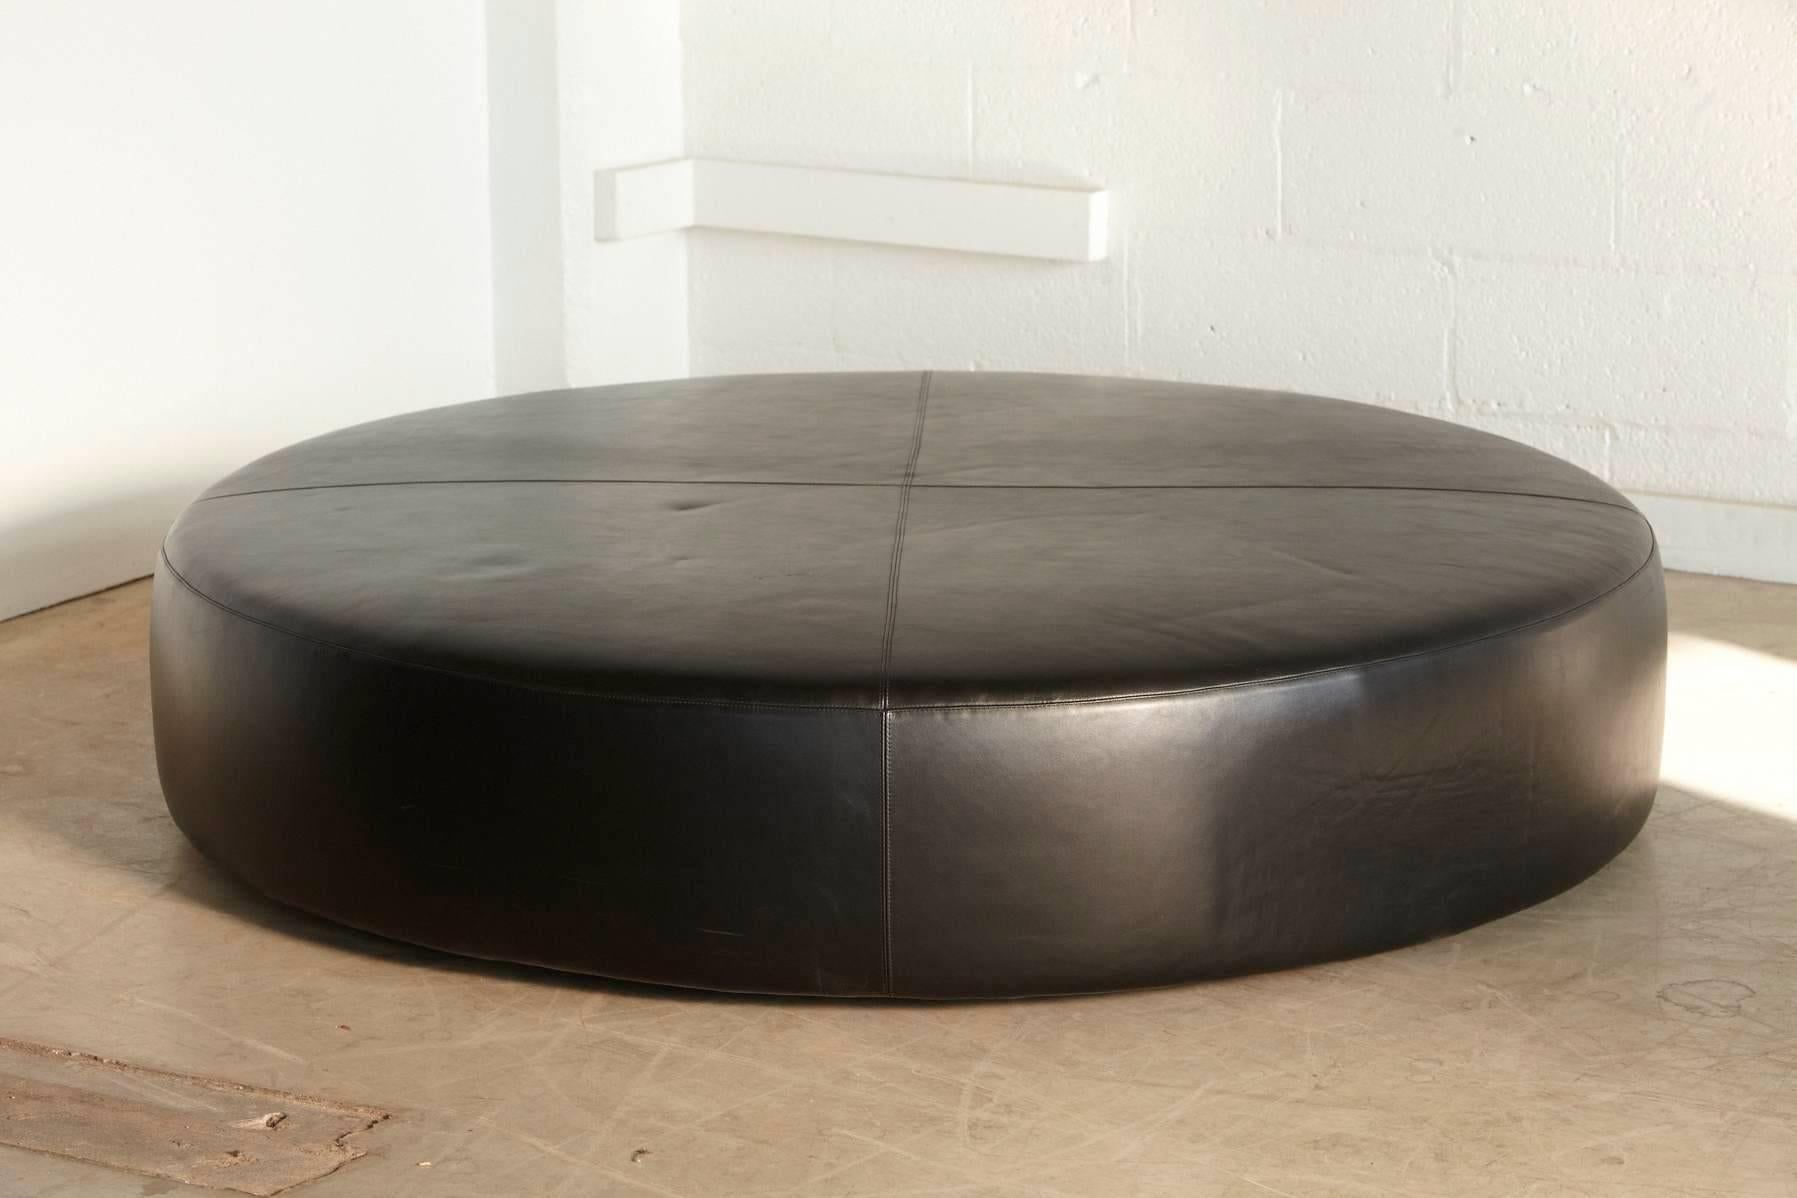 The large round leather ottoman can be used almost everywhere, for example as a useful table conveniently next to a sofa, a seat or a stand alone object and is the perfect neutral match for many differently styles of sofas. The ottoman has seams on